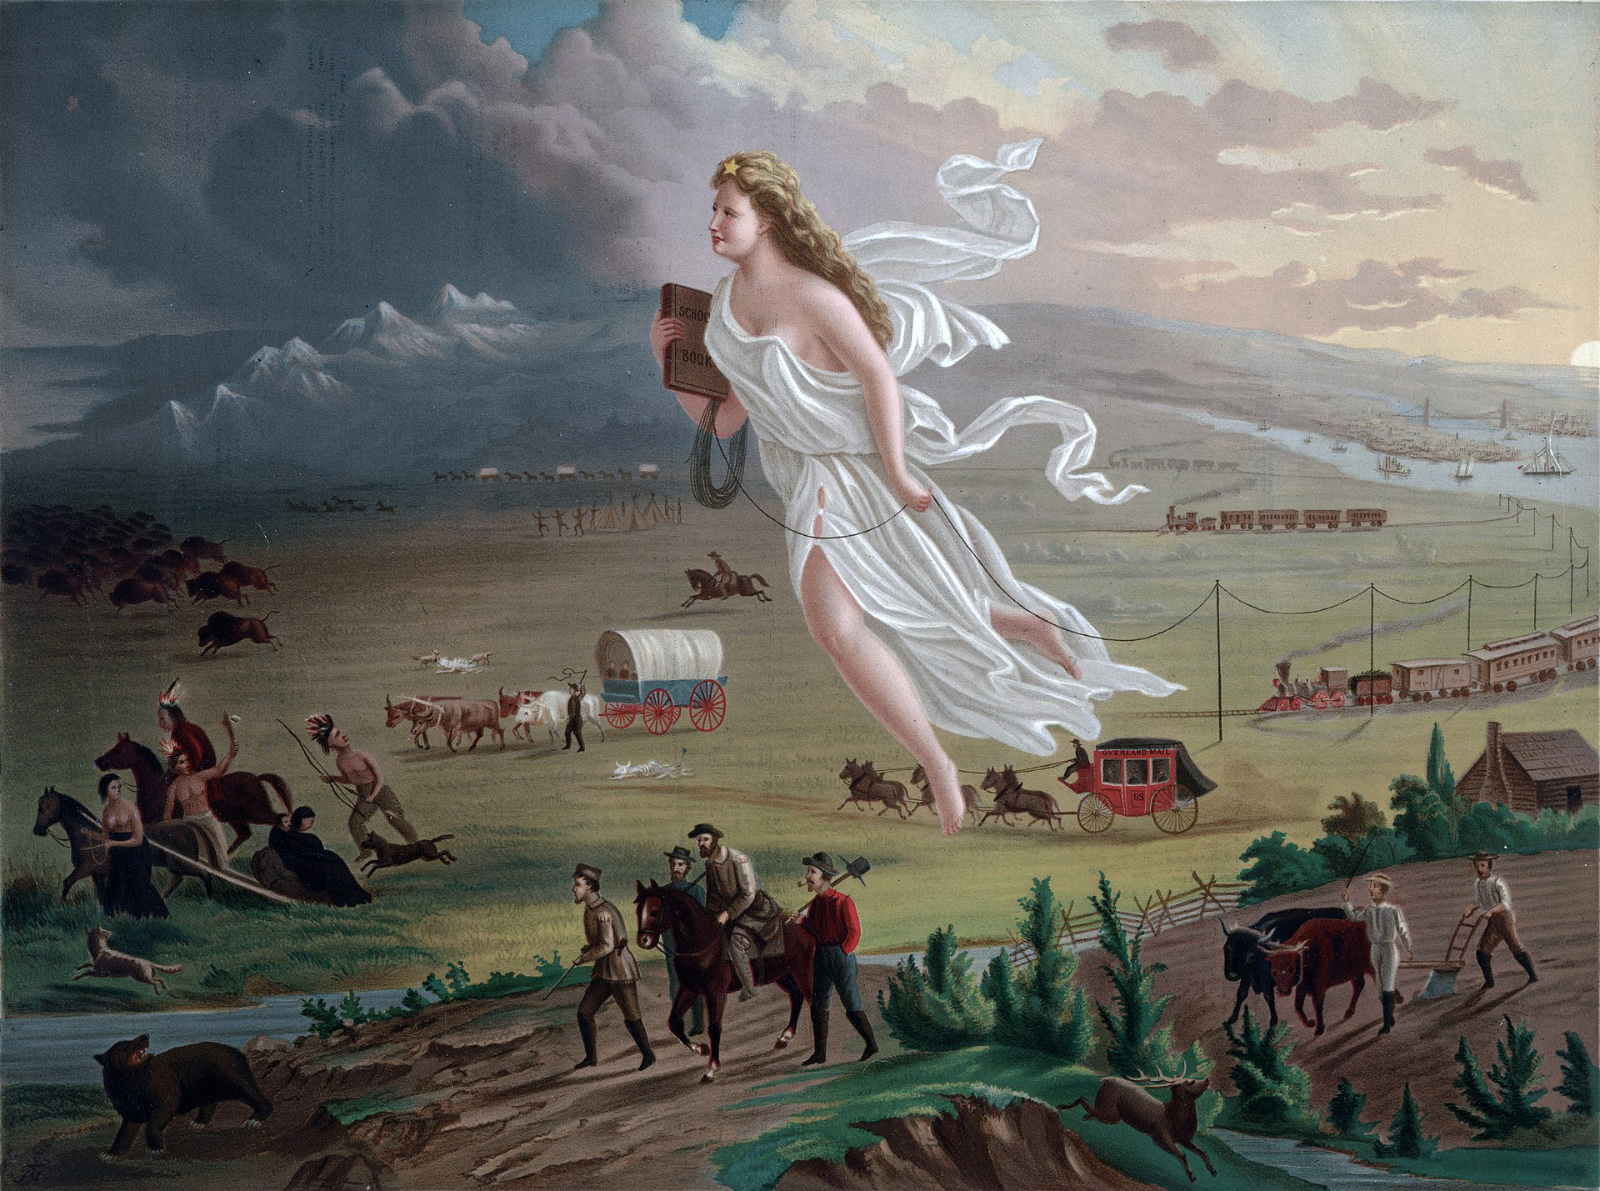 1872 painting "American Progress": an outdoors scene with farm fields and a large prairie with mountains in the background; farmers, hunters, horse drawn carriages, and trains all move from right to left to show the theme of manifest destiny; in the center is a larger than life blonde woman representing the hypothetical blessing of manifest destiny